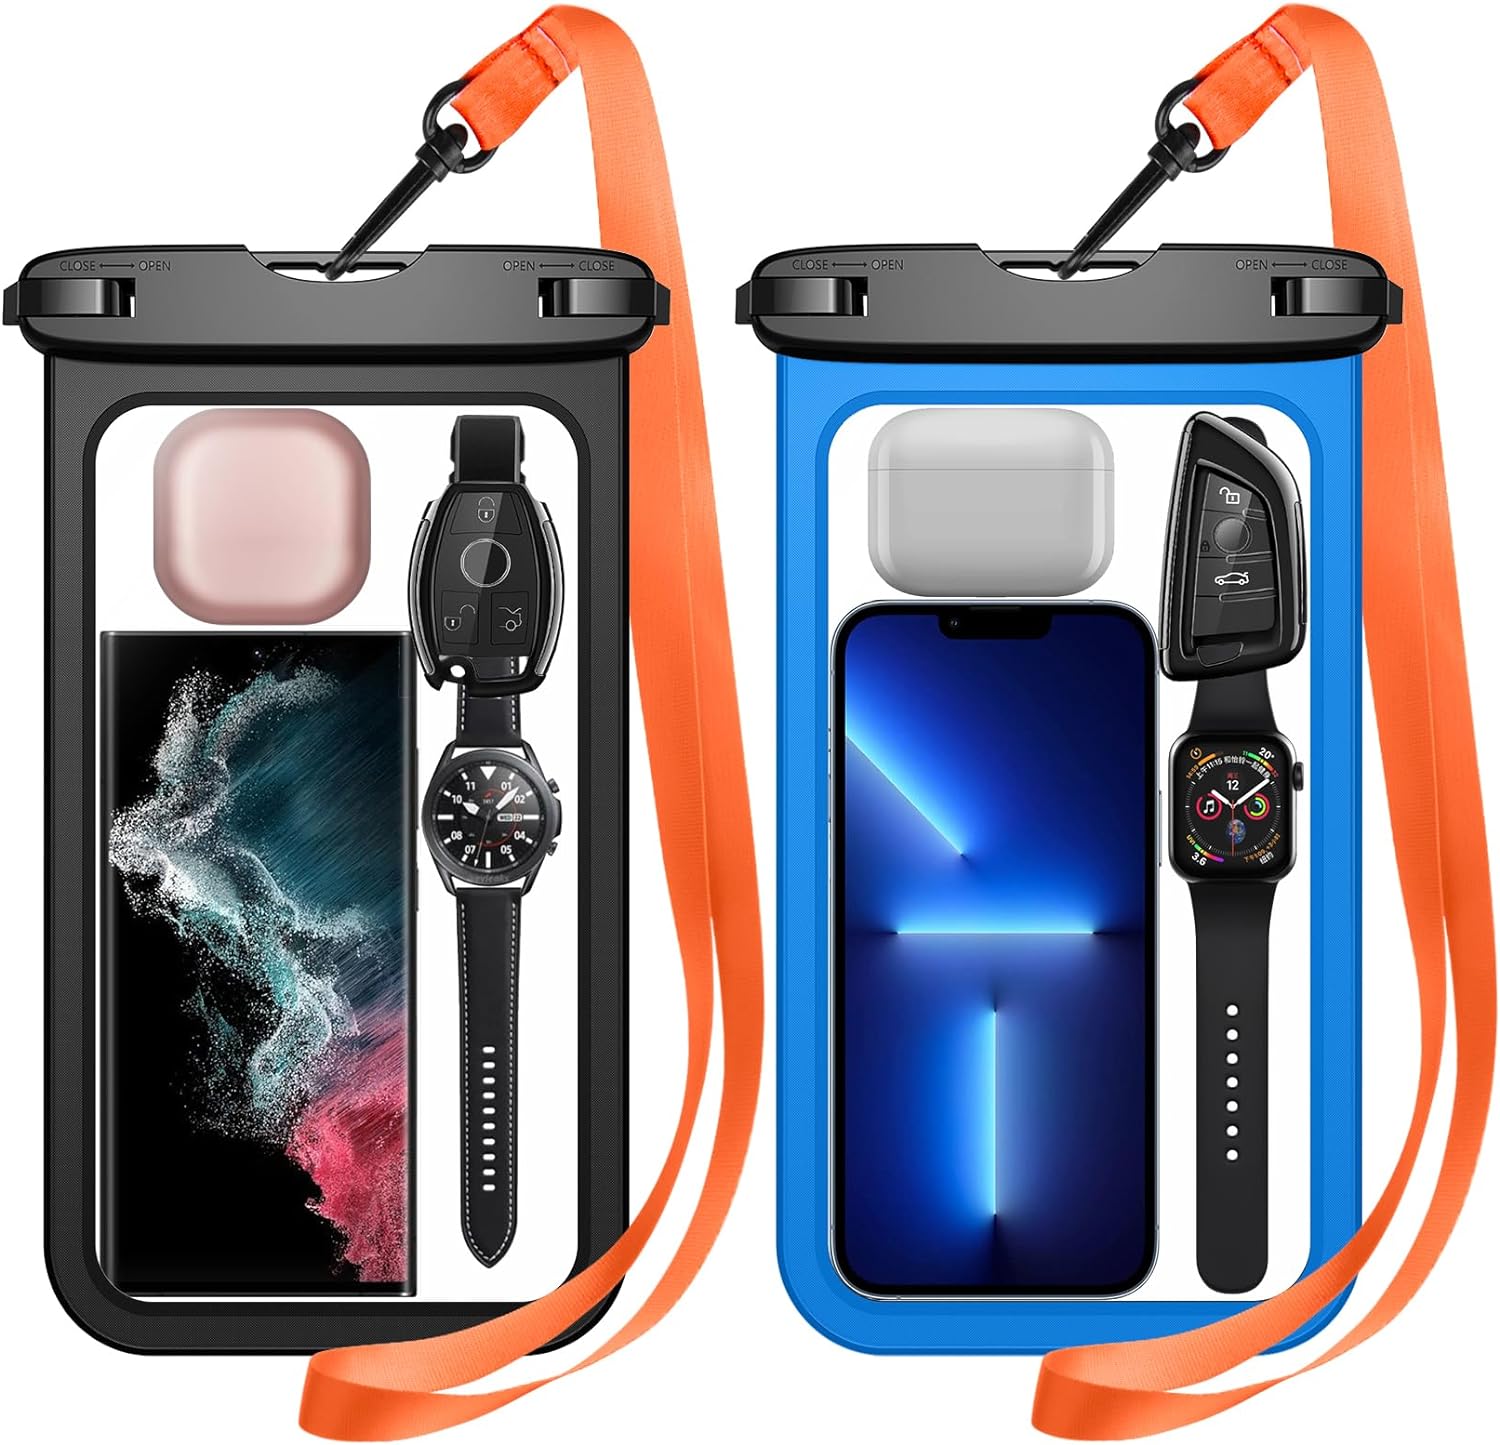 Temdan 2 Pcs Waterproof Phone Pouch, [Up to 10 Large] Universal IPX8 Waterproof Cell Phone Case Dry Bag with Lanyard for iPhone 15 Pro Max/14/13/12/11/SE,Galaxy S23 Ultra/S22/S21 for Vacation -Blue